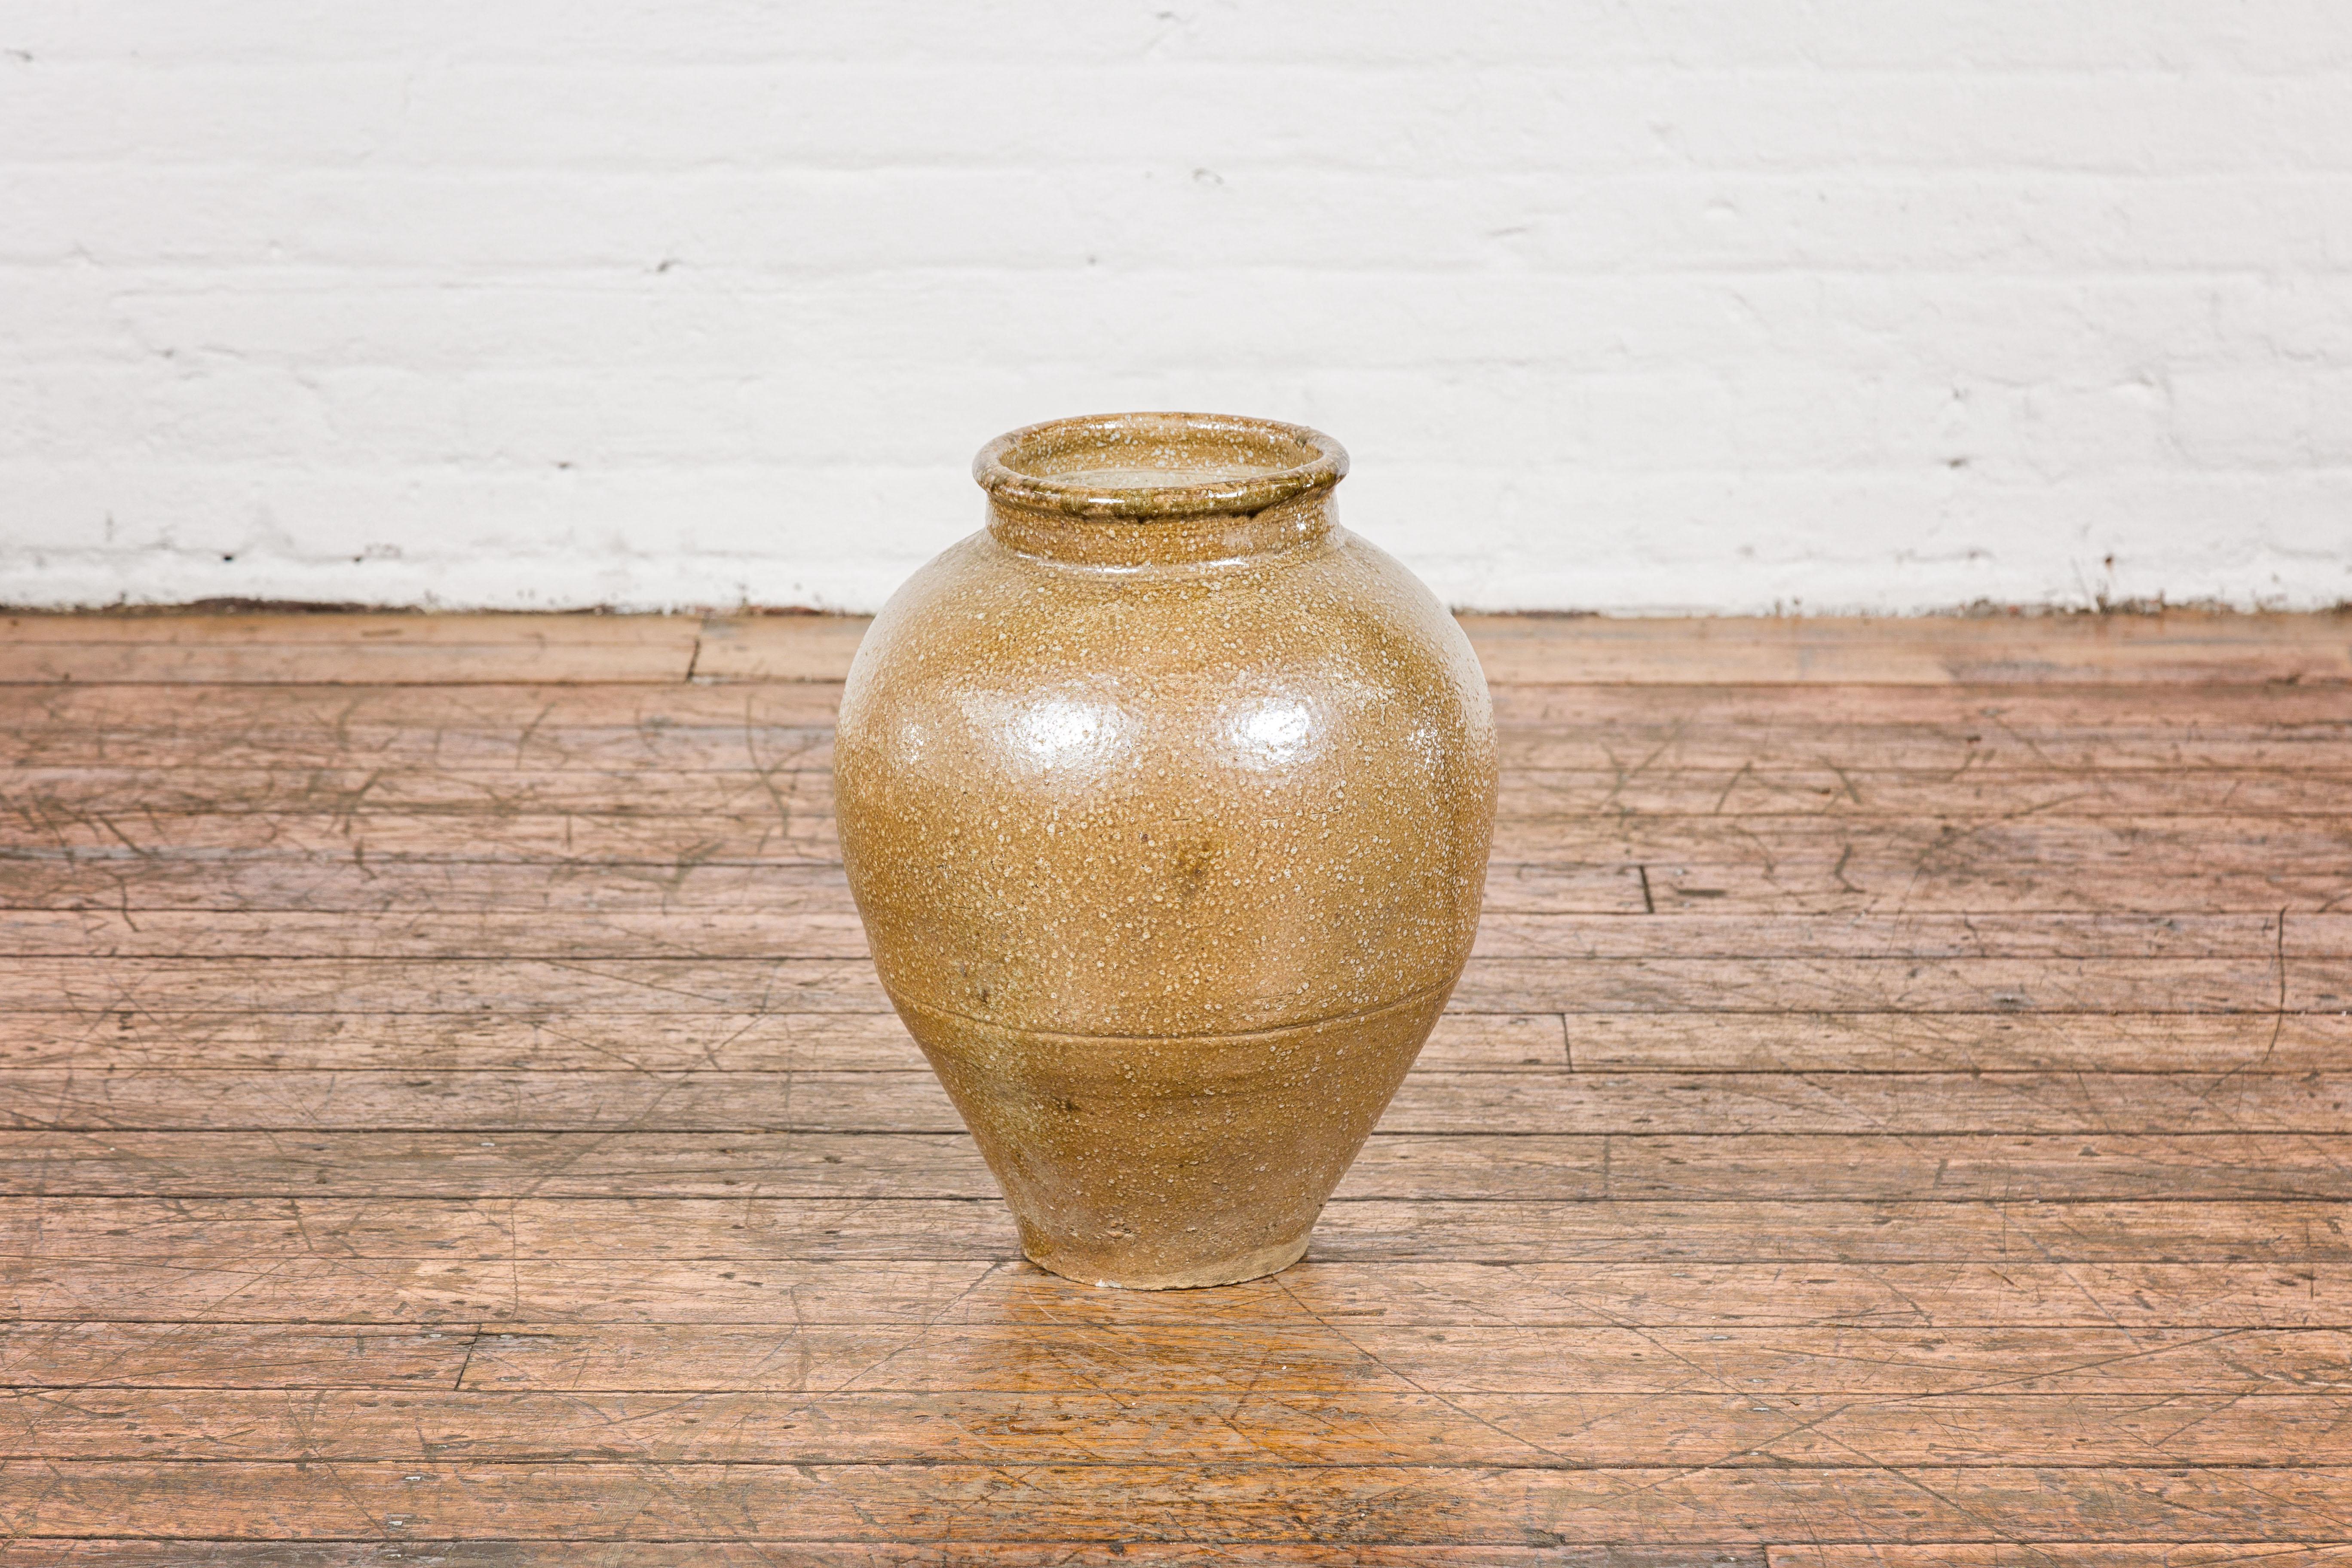 Japanese Taishō Period Two-Tone Sand Glaze Vase with Textured Finish, circa 1900 For Sale 2